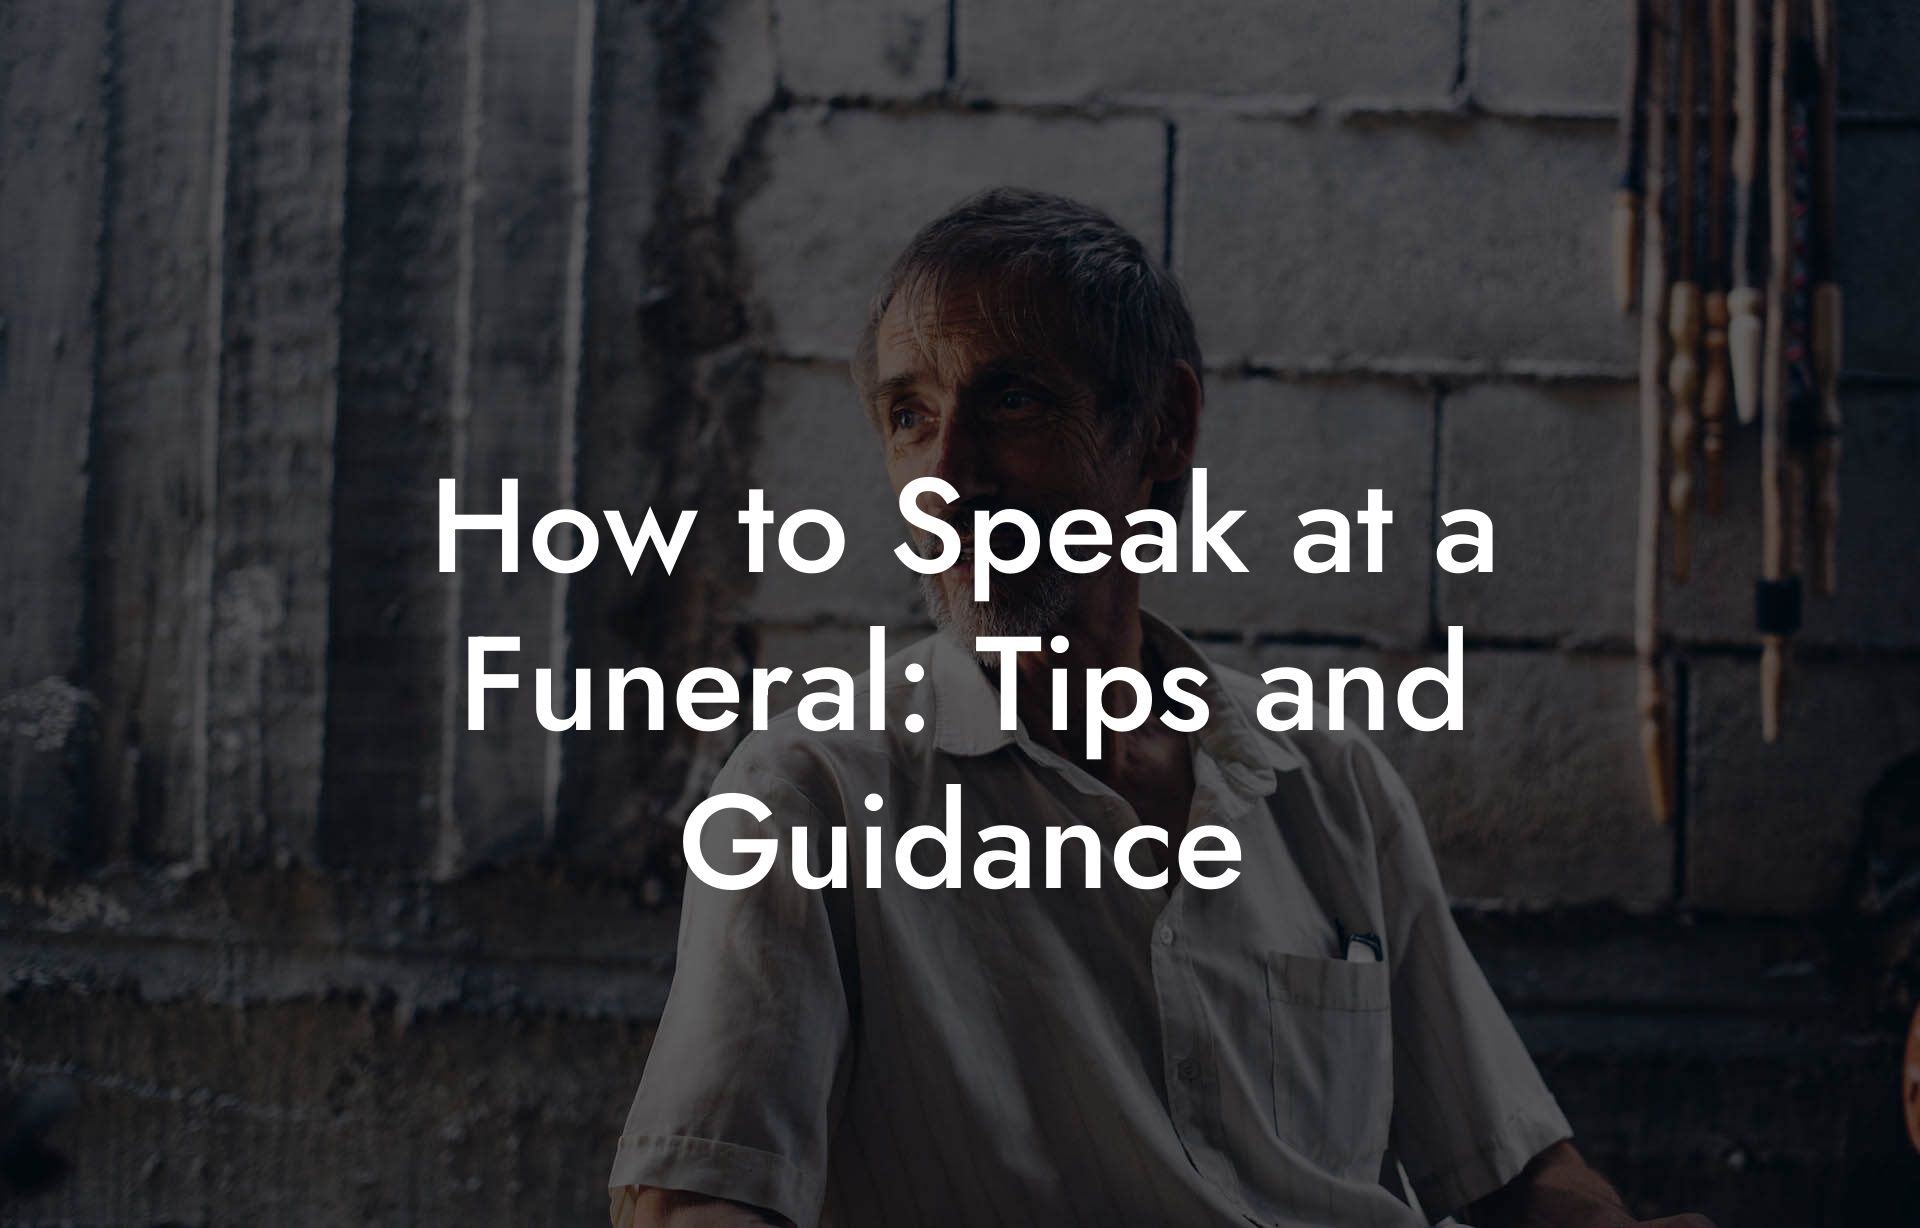 How to Speak at a Funeral: Tips and Guidance